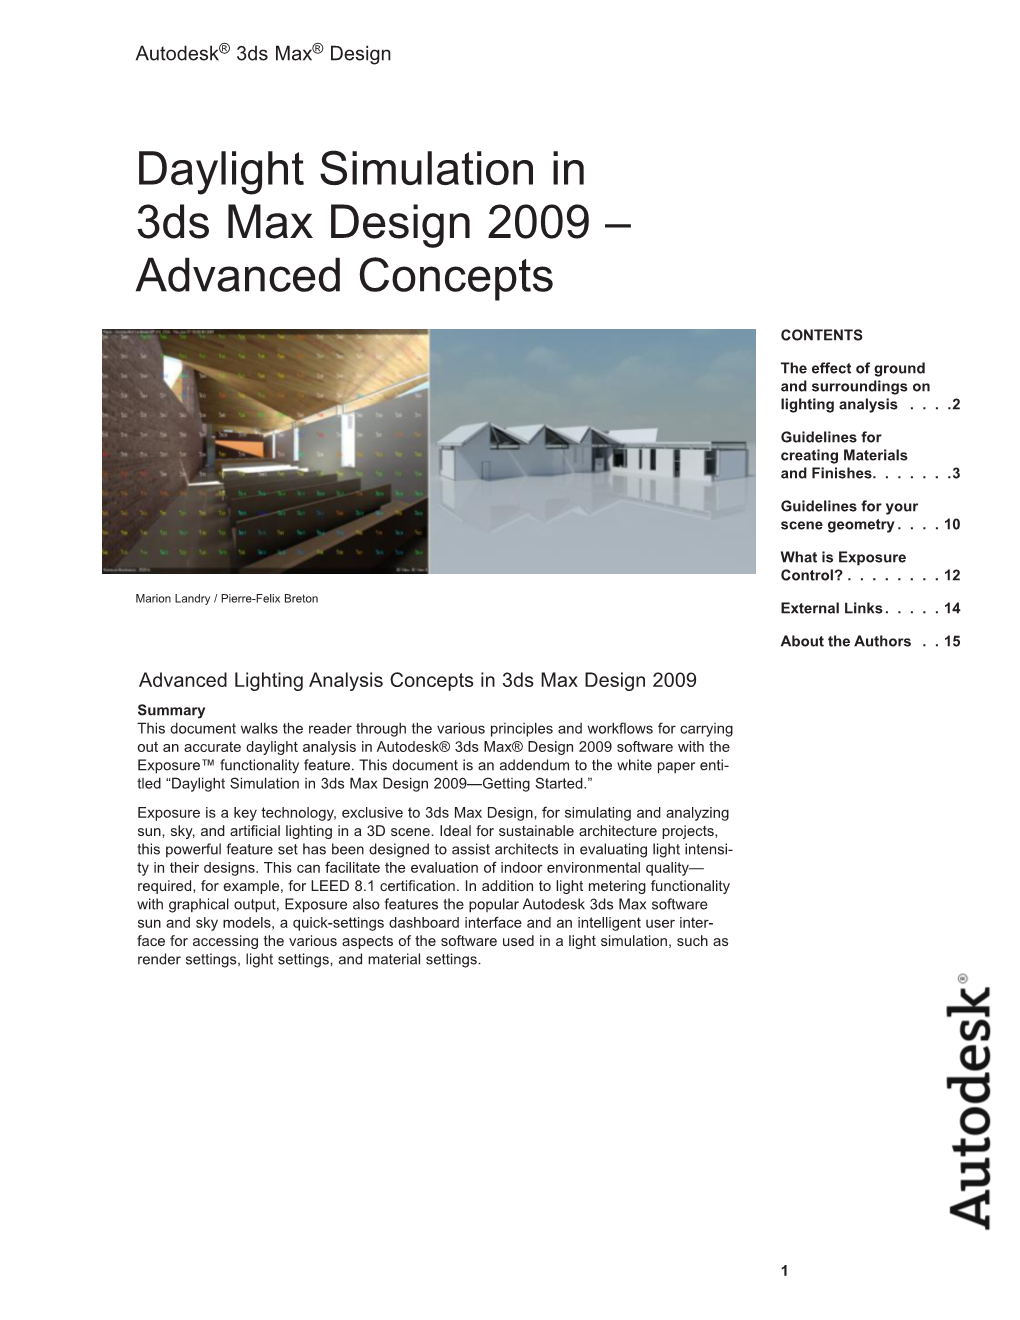 Daylight Simulation in 3Ds Max Design 2009 – Advanced Concepts